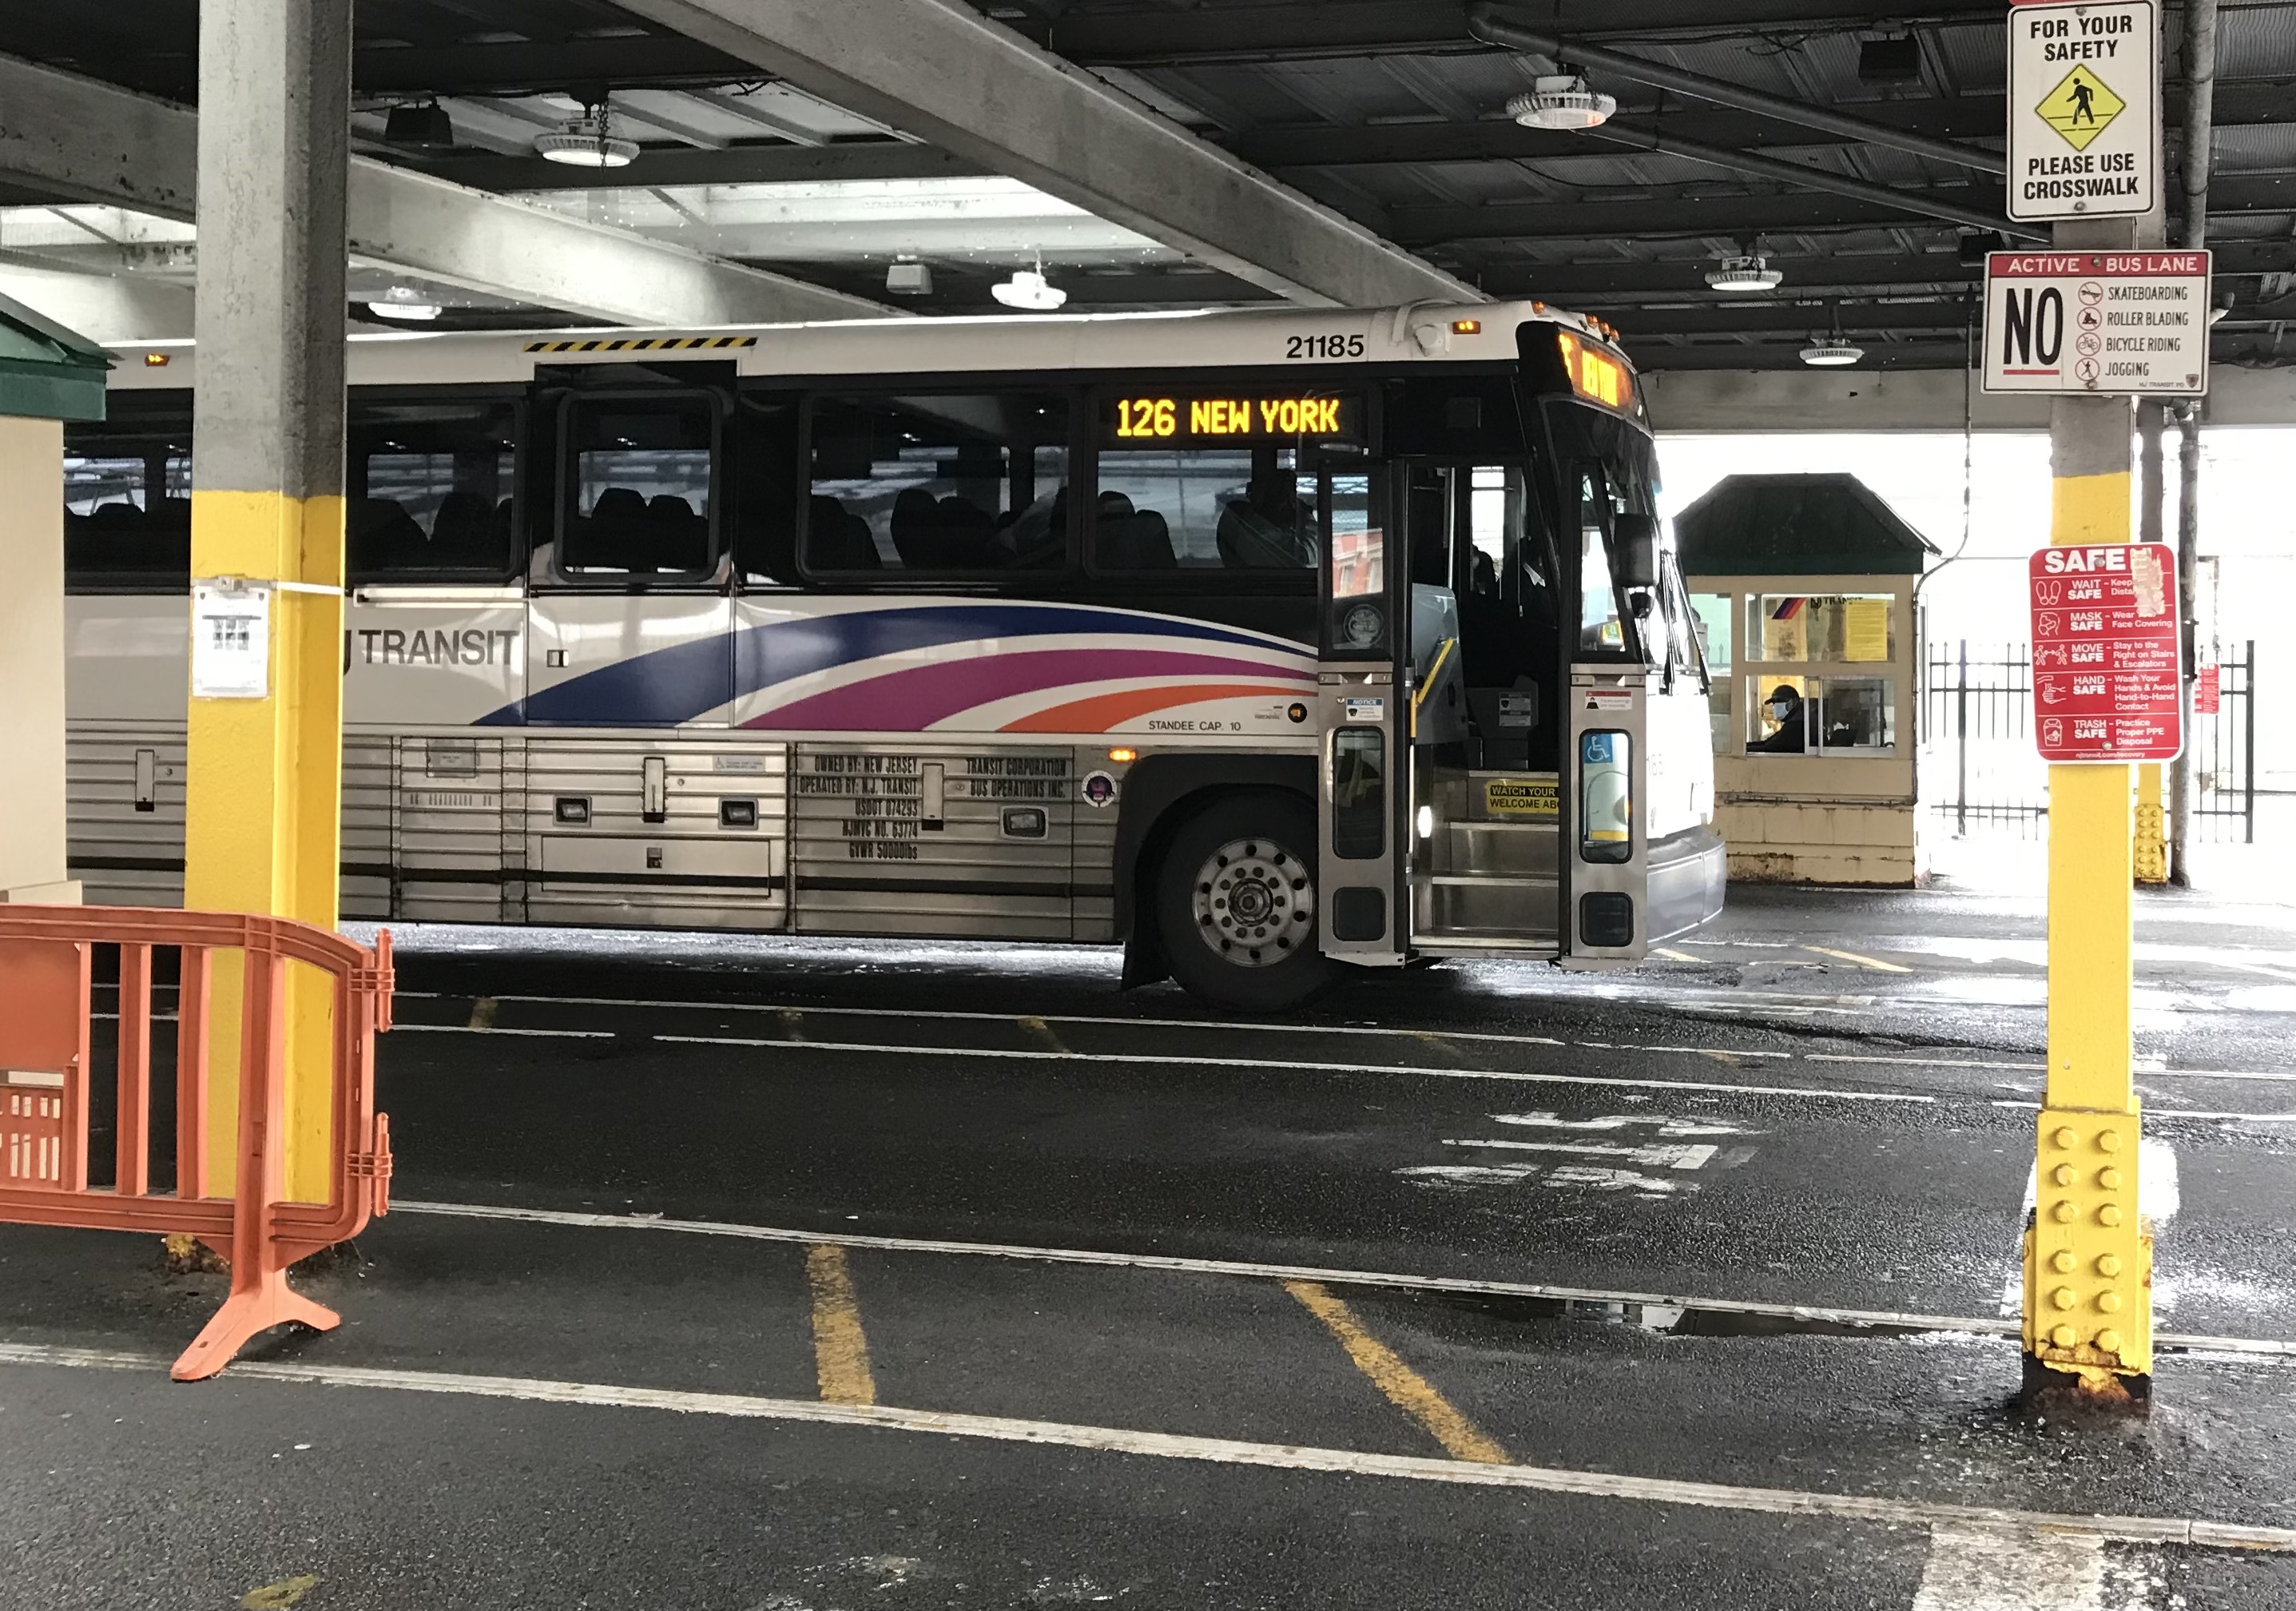 NJ Transit spends $142M to buy the last replacements for buses